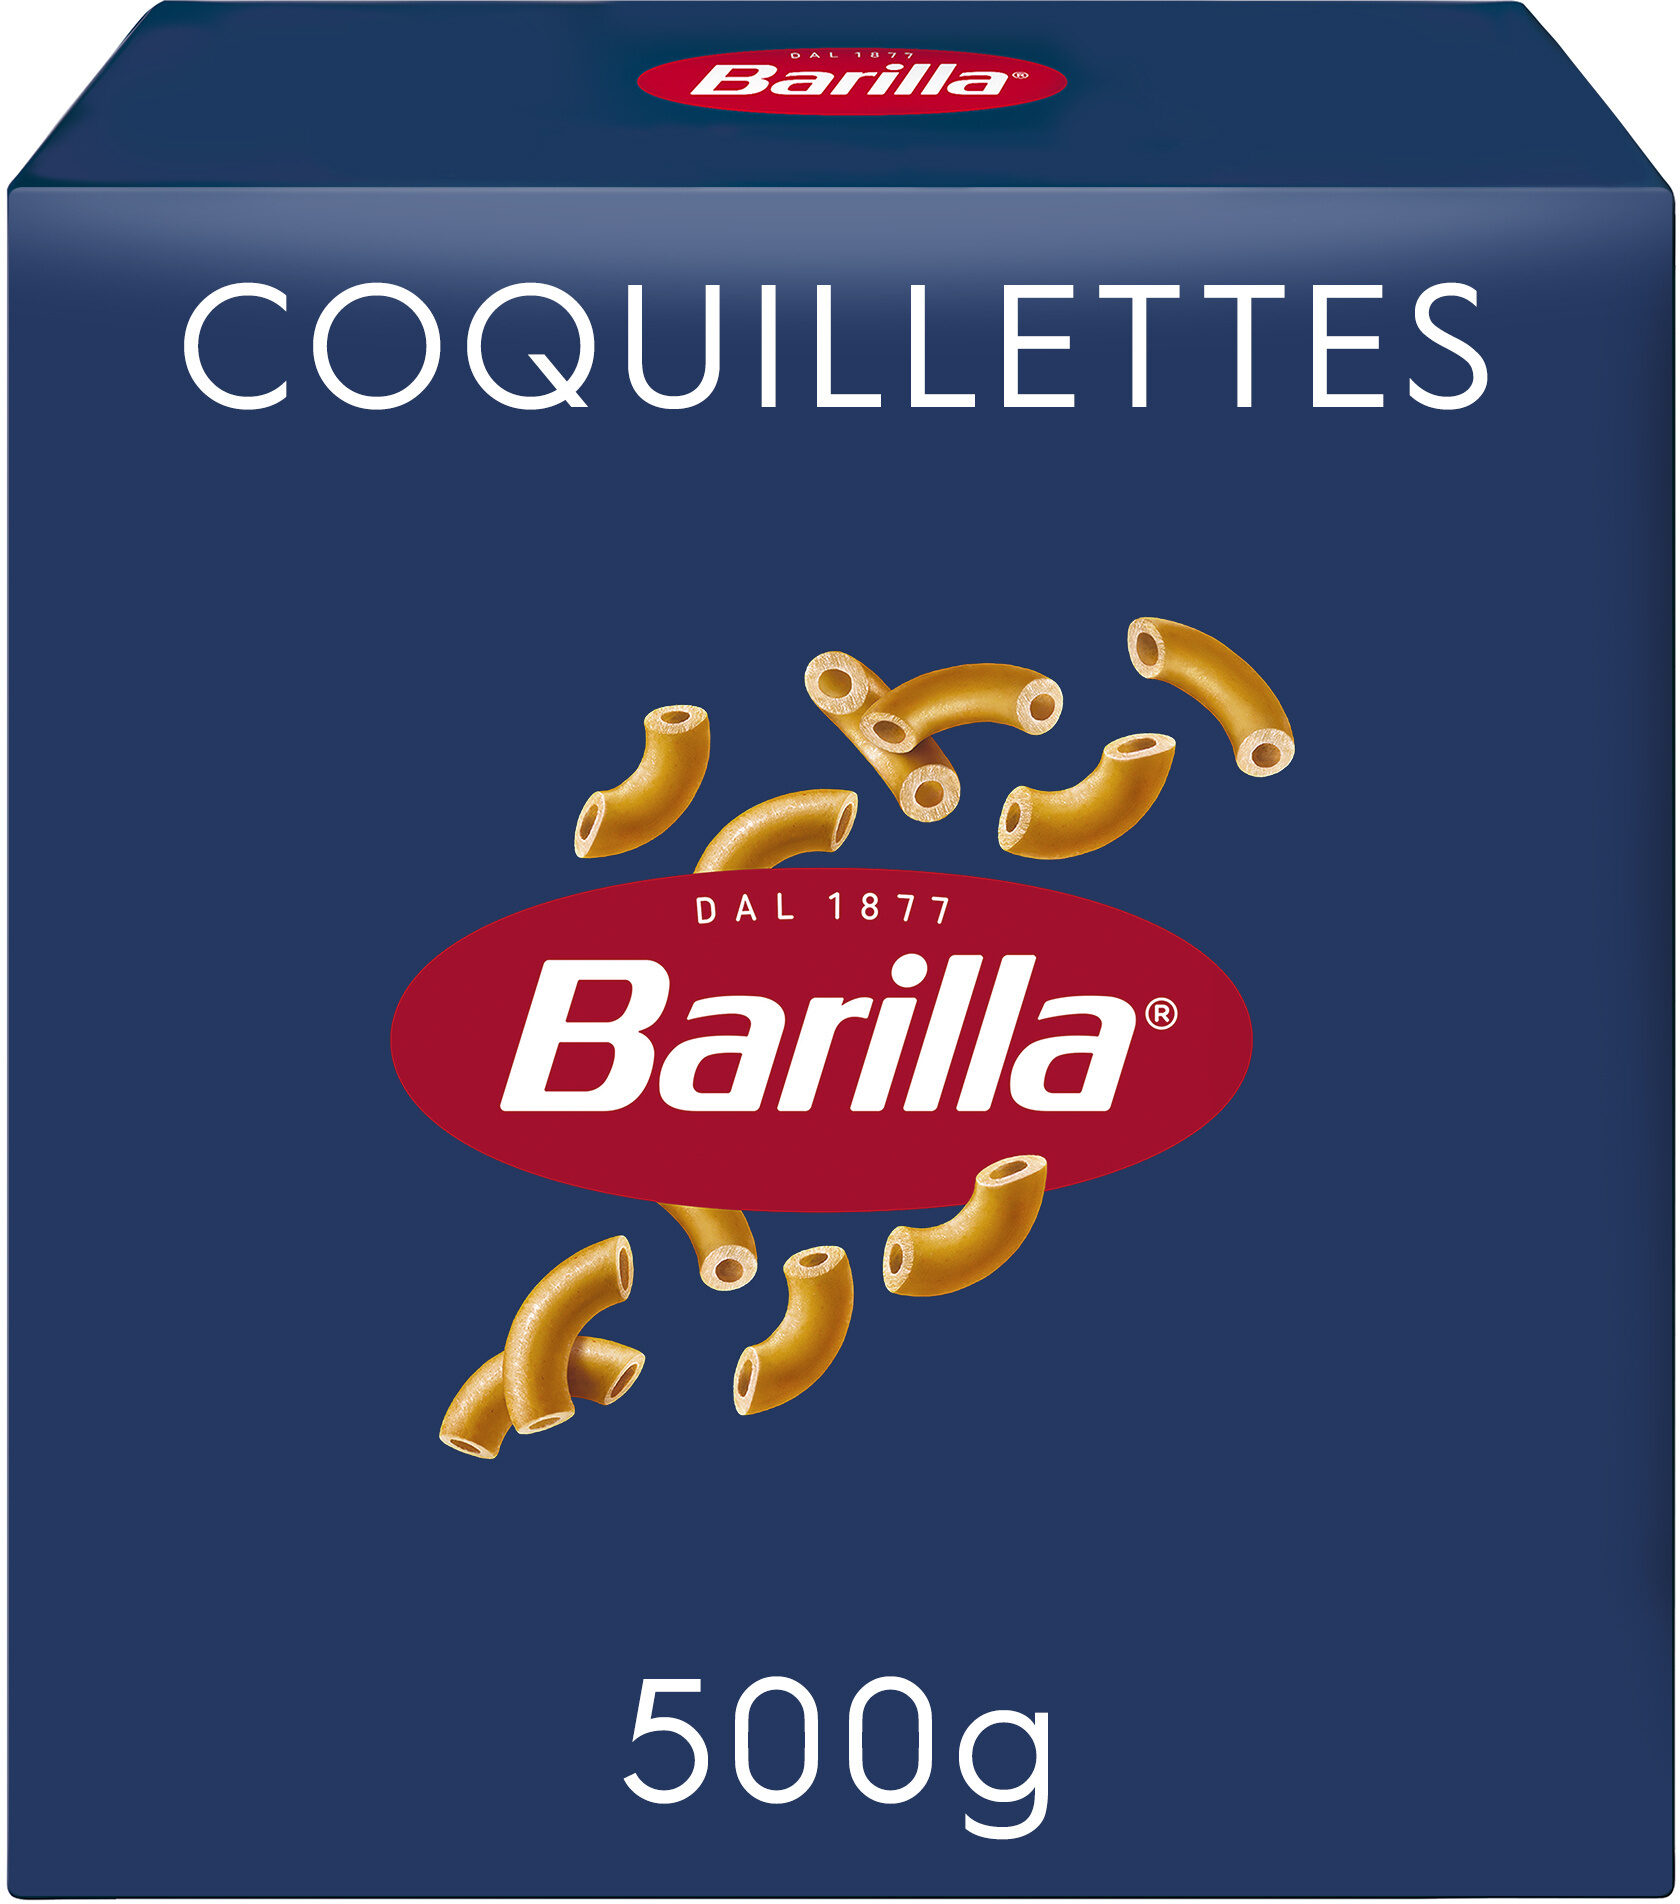 Barilla pates coquillettes 500g - Product - fr